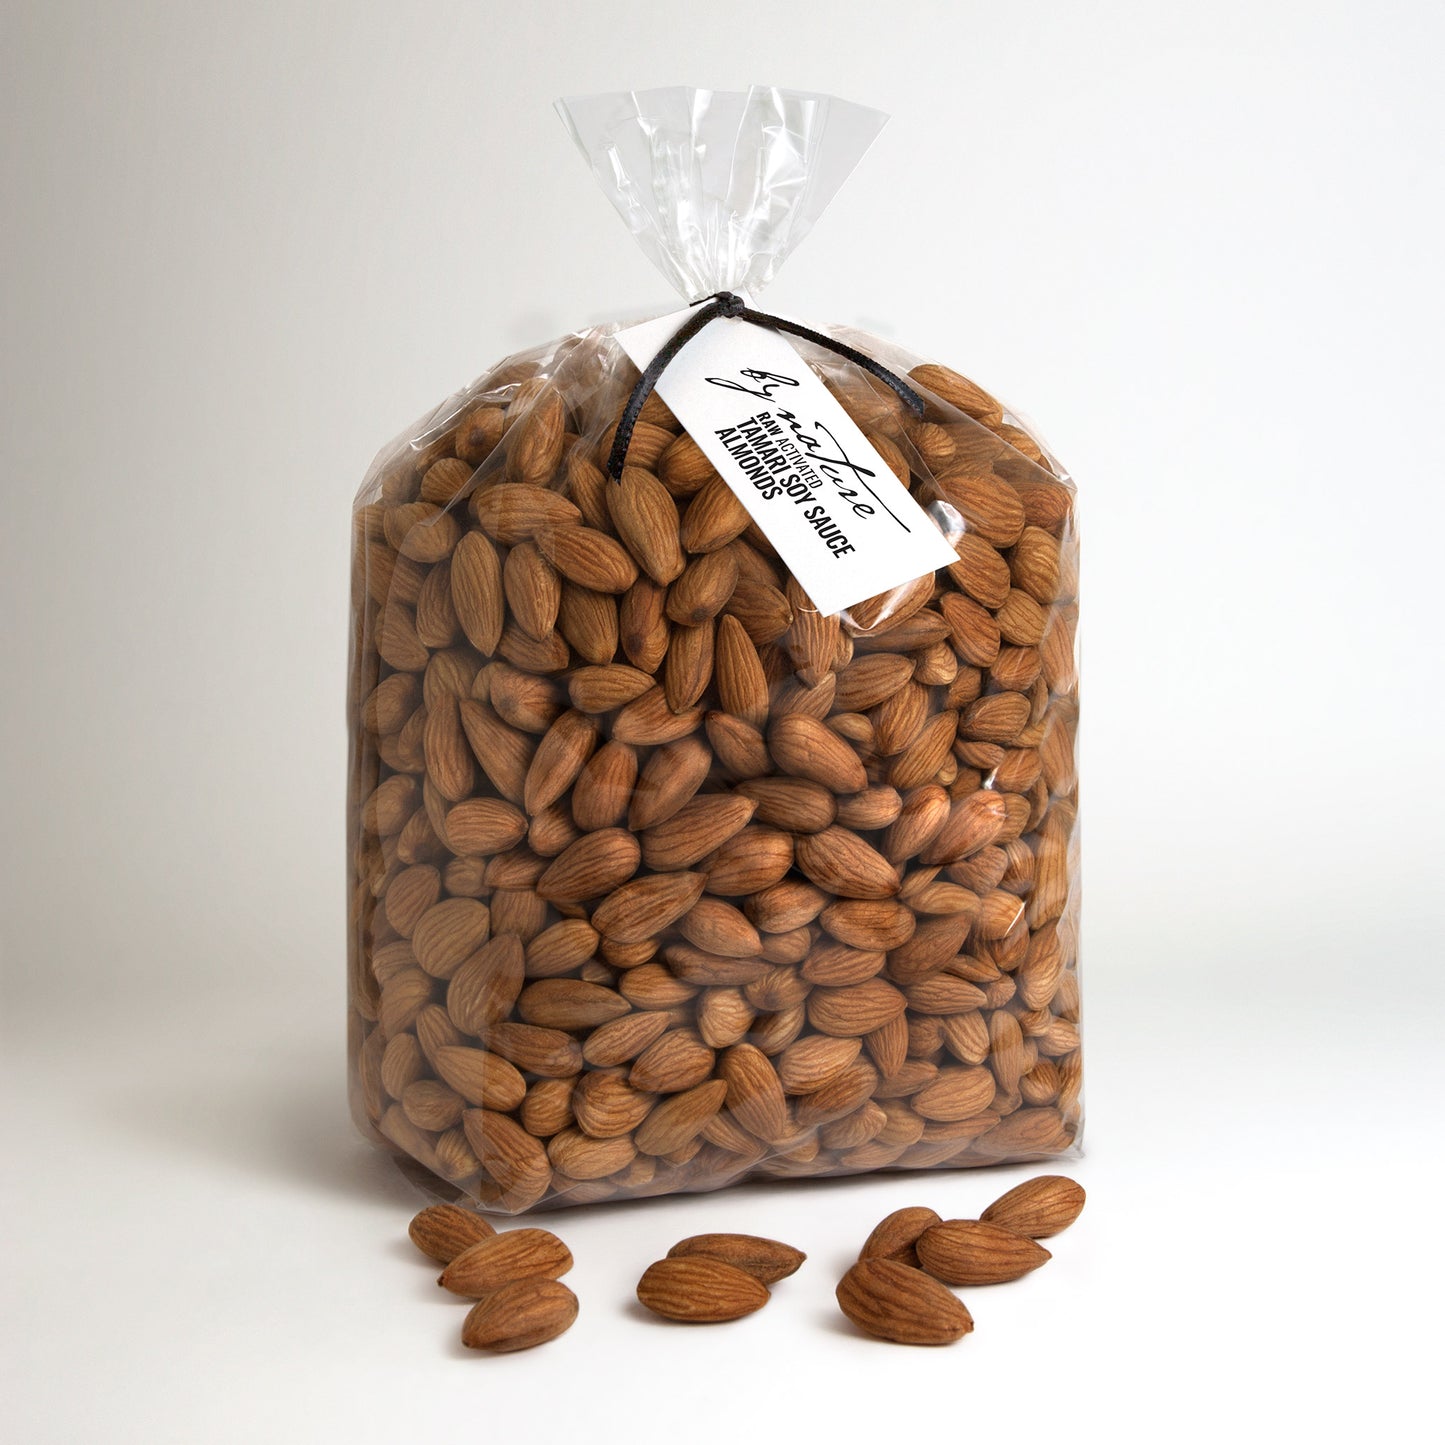 BY NATURE Tamari Soy Sauce Almonds, 1kg - raw, activated, dried not roasted.